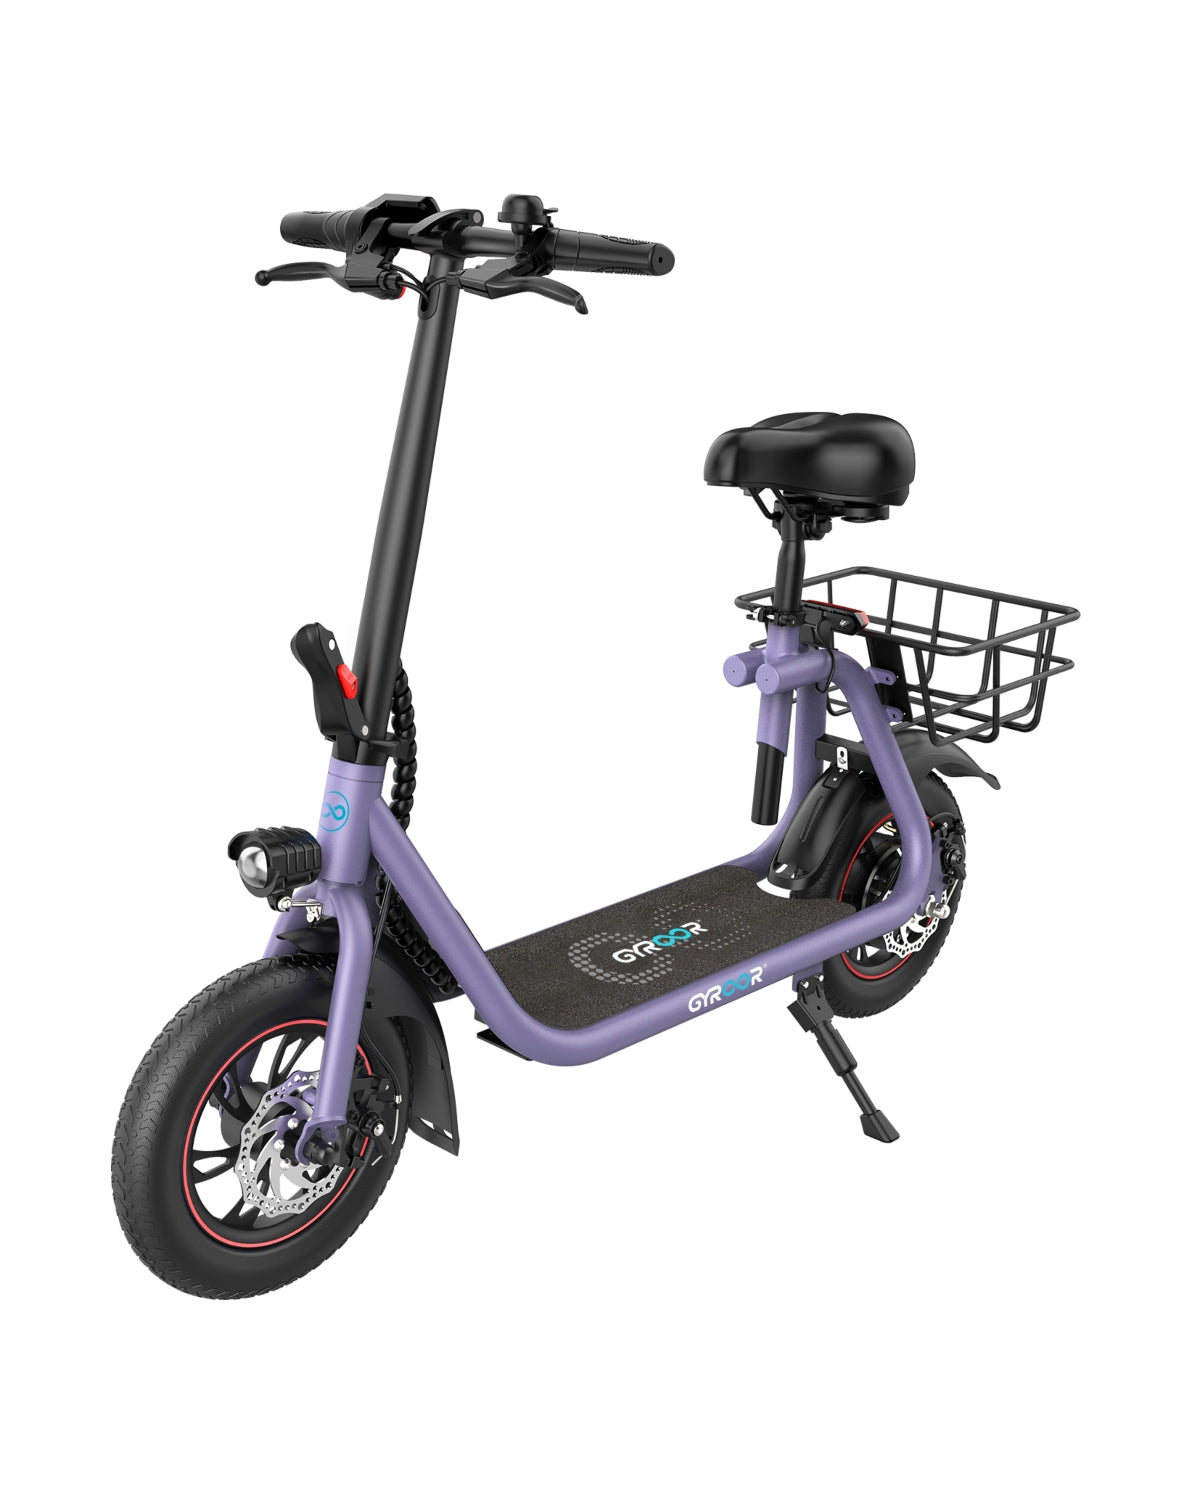 Gyroor C1 Electric Scooter For Adults With Seat & Carry Basket